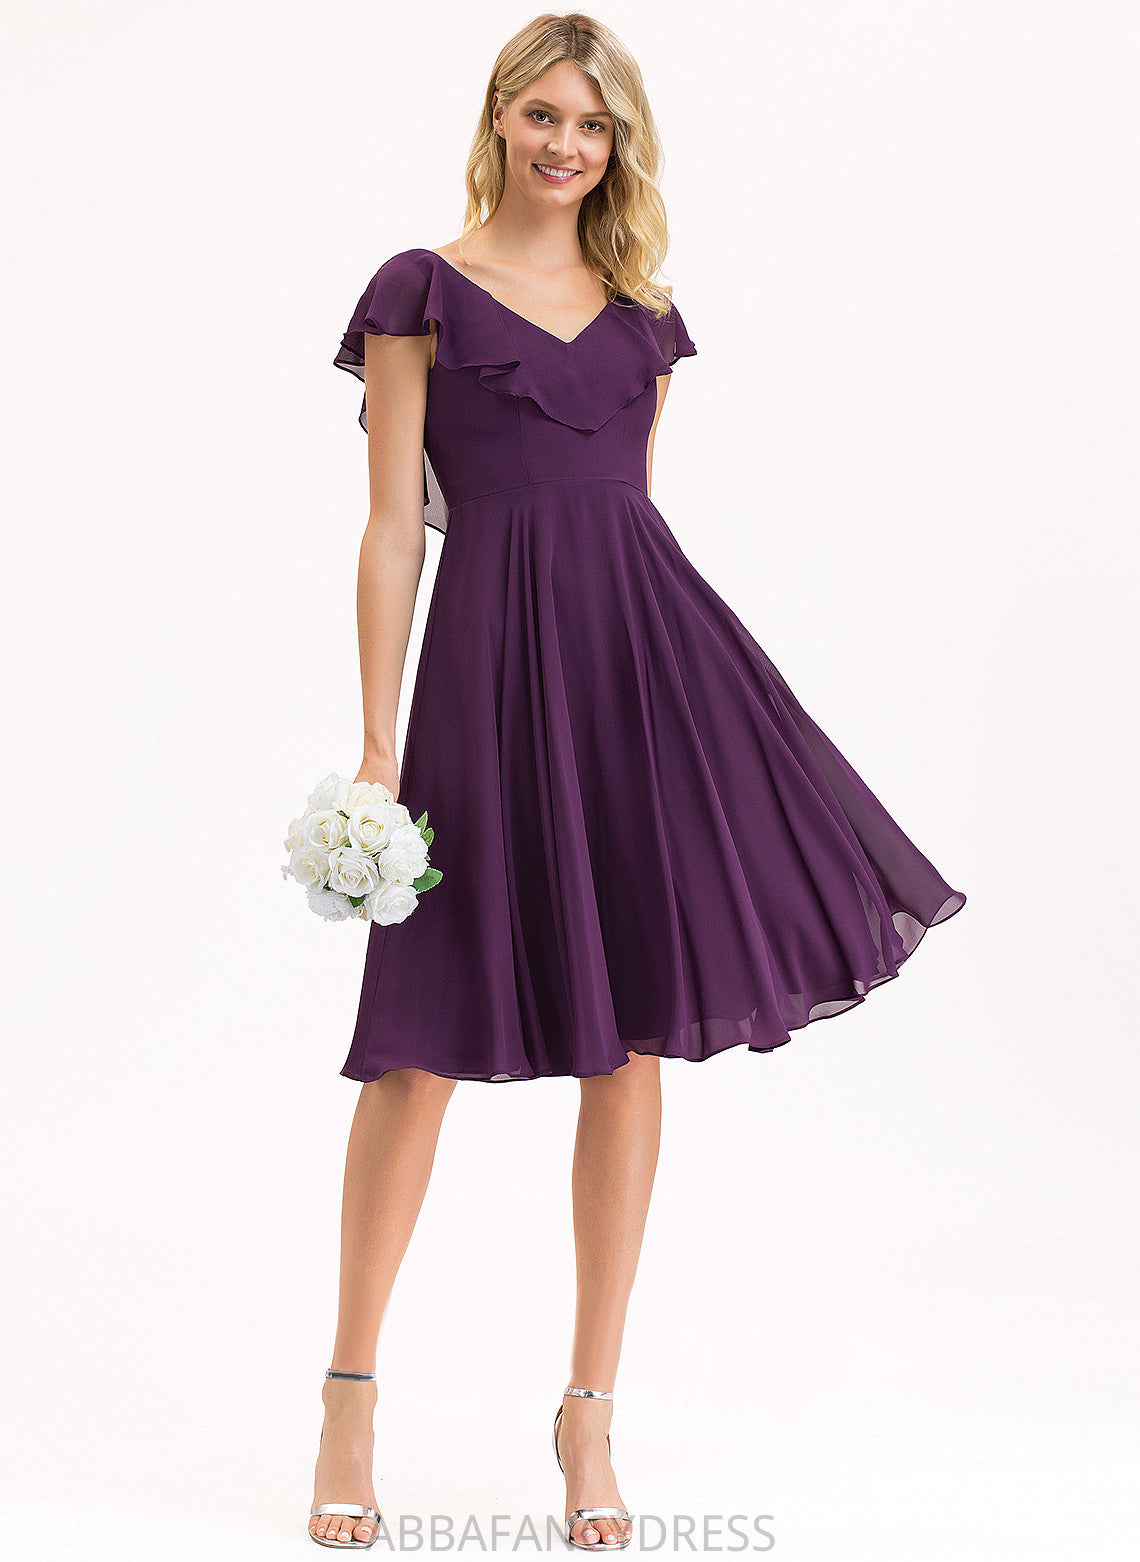 Knee-Length Cascading Chiffon Dress Cocktail Dresses With Ruffles V-neck Janiyah Cocktail A-Line